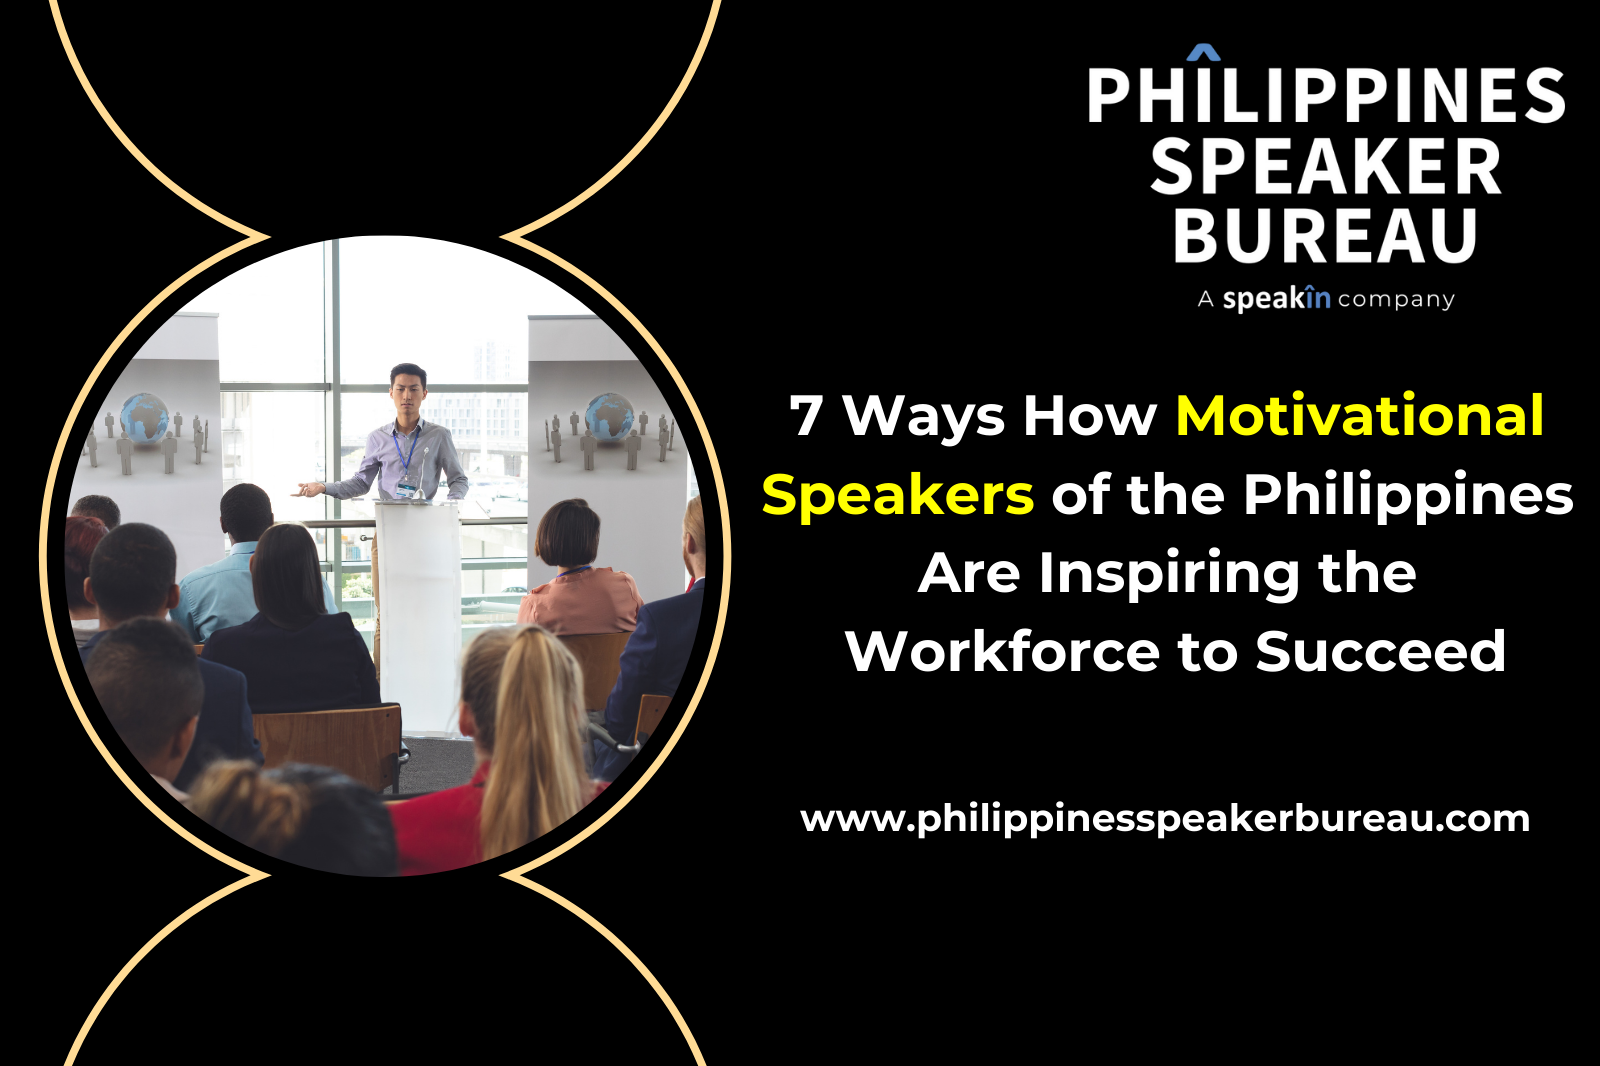 7 Ways How Motivational Speakers of the Philippines Are Inspiring the Workforce to Succeed